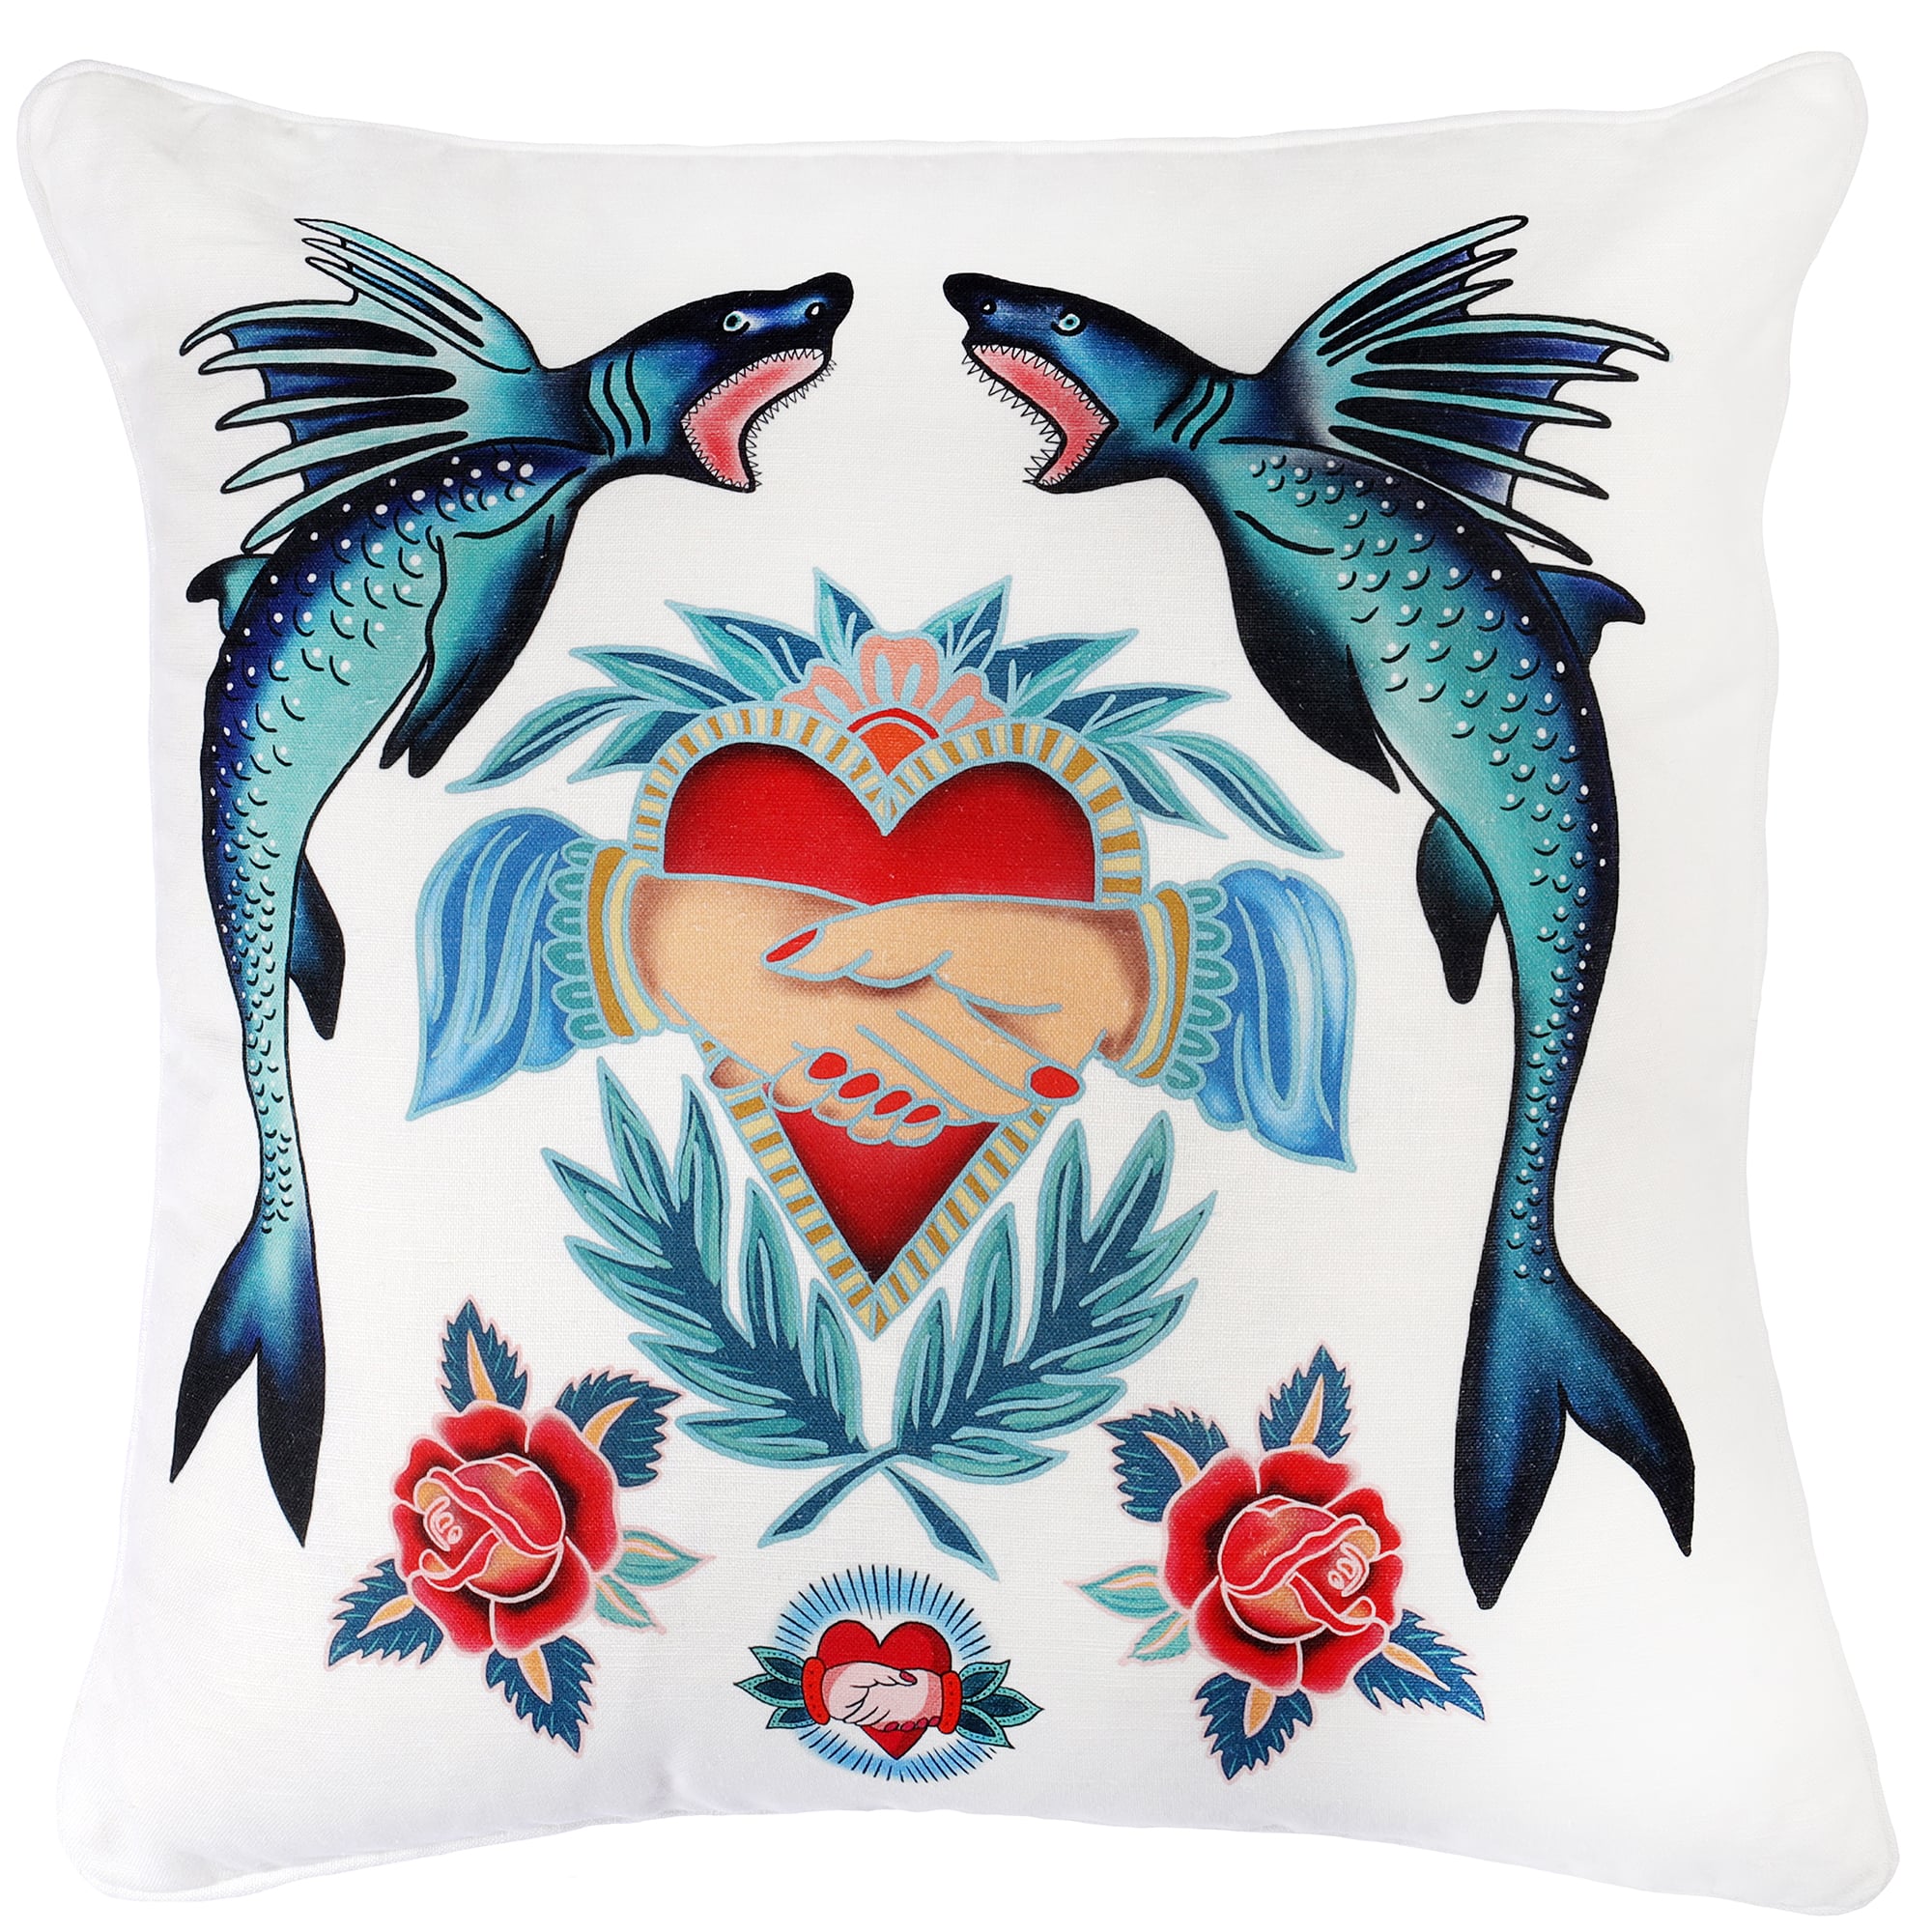 White cushion with sailor's tattoo inspired brightly coloured design of sharks, hearts, hands and roses.